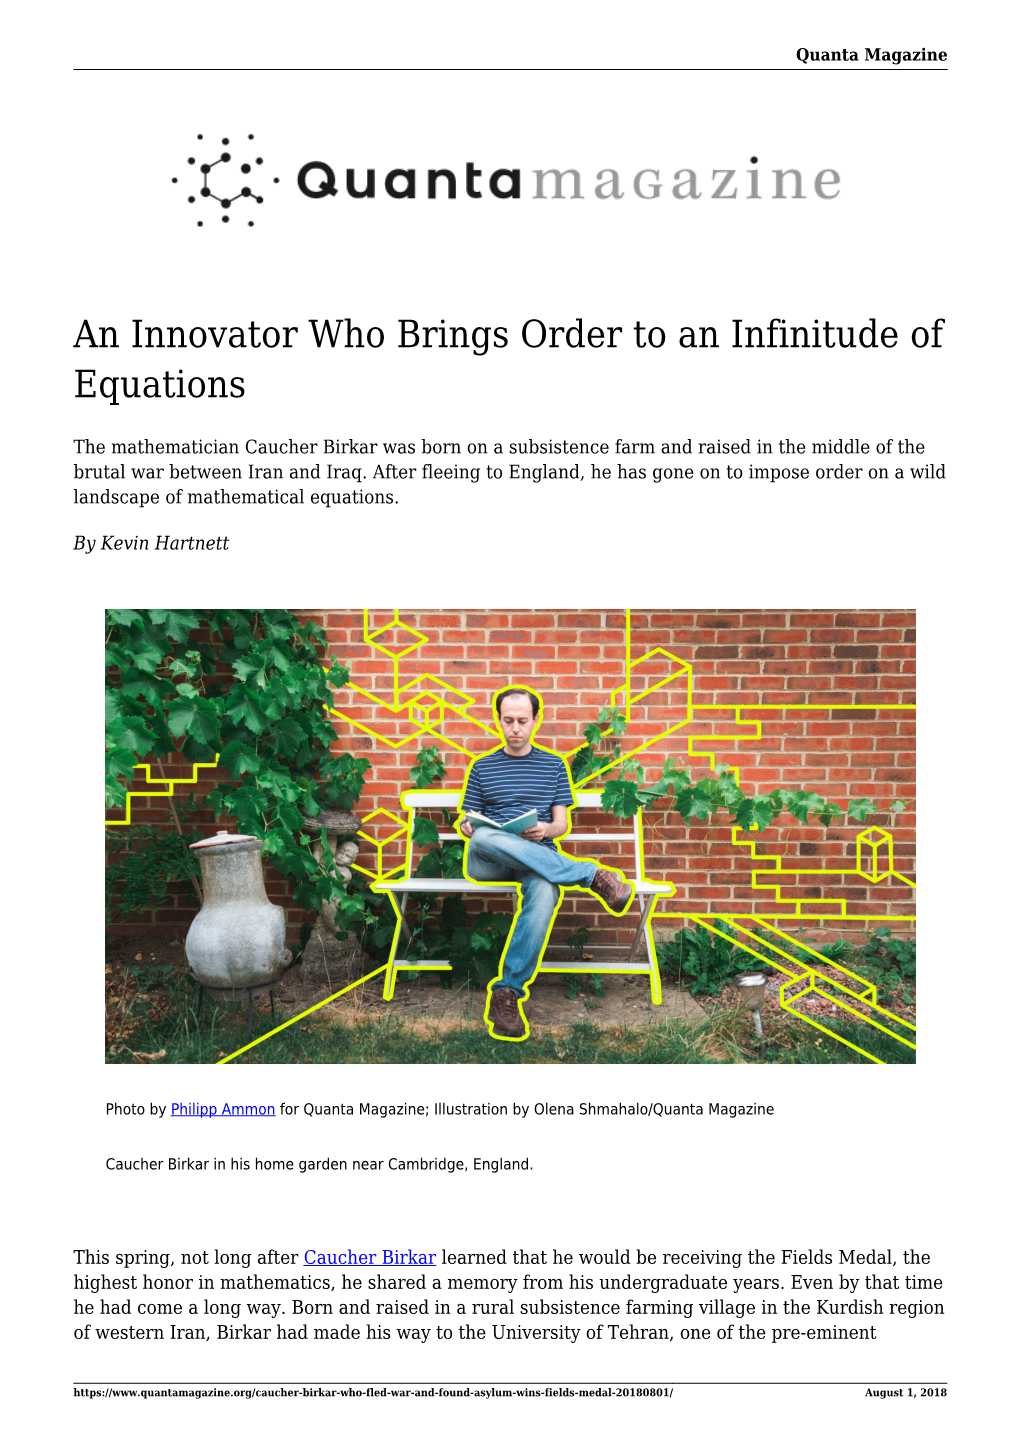 An Innovator Who Brings Order to an Infinitude of Equations